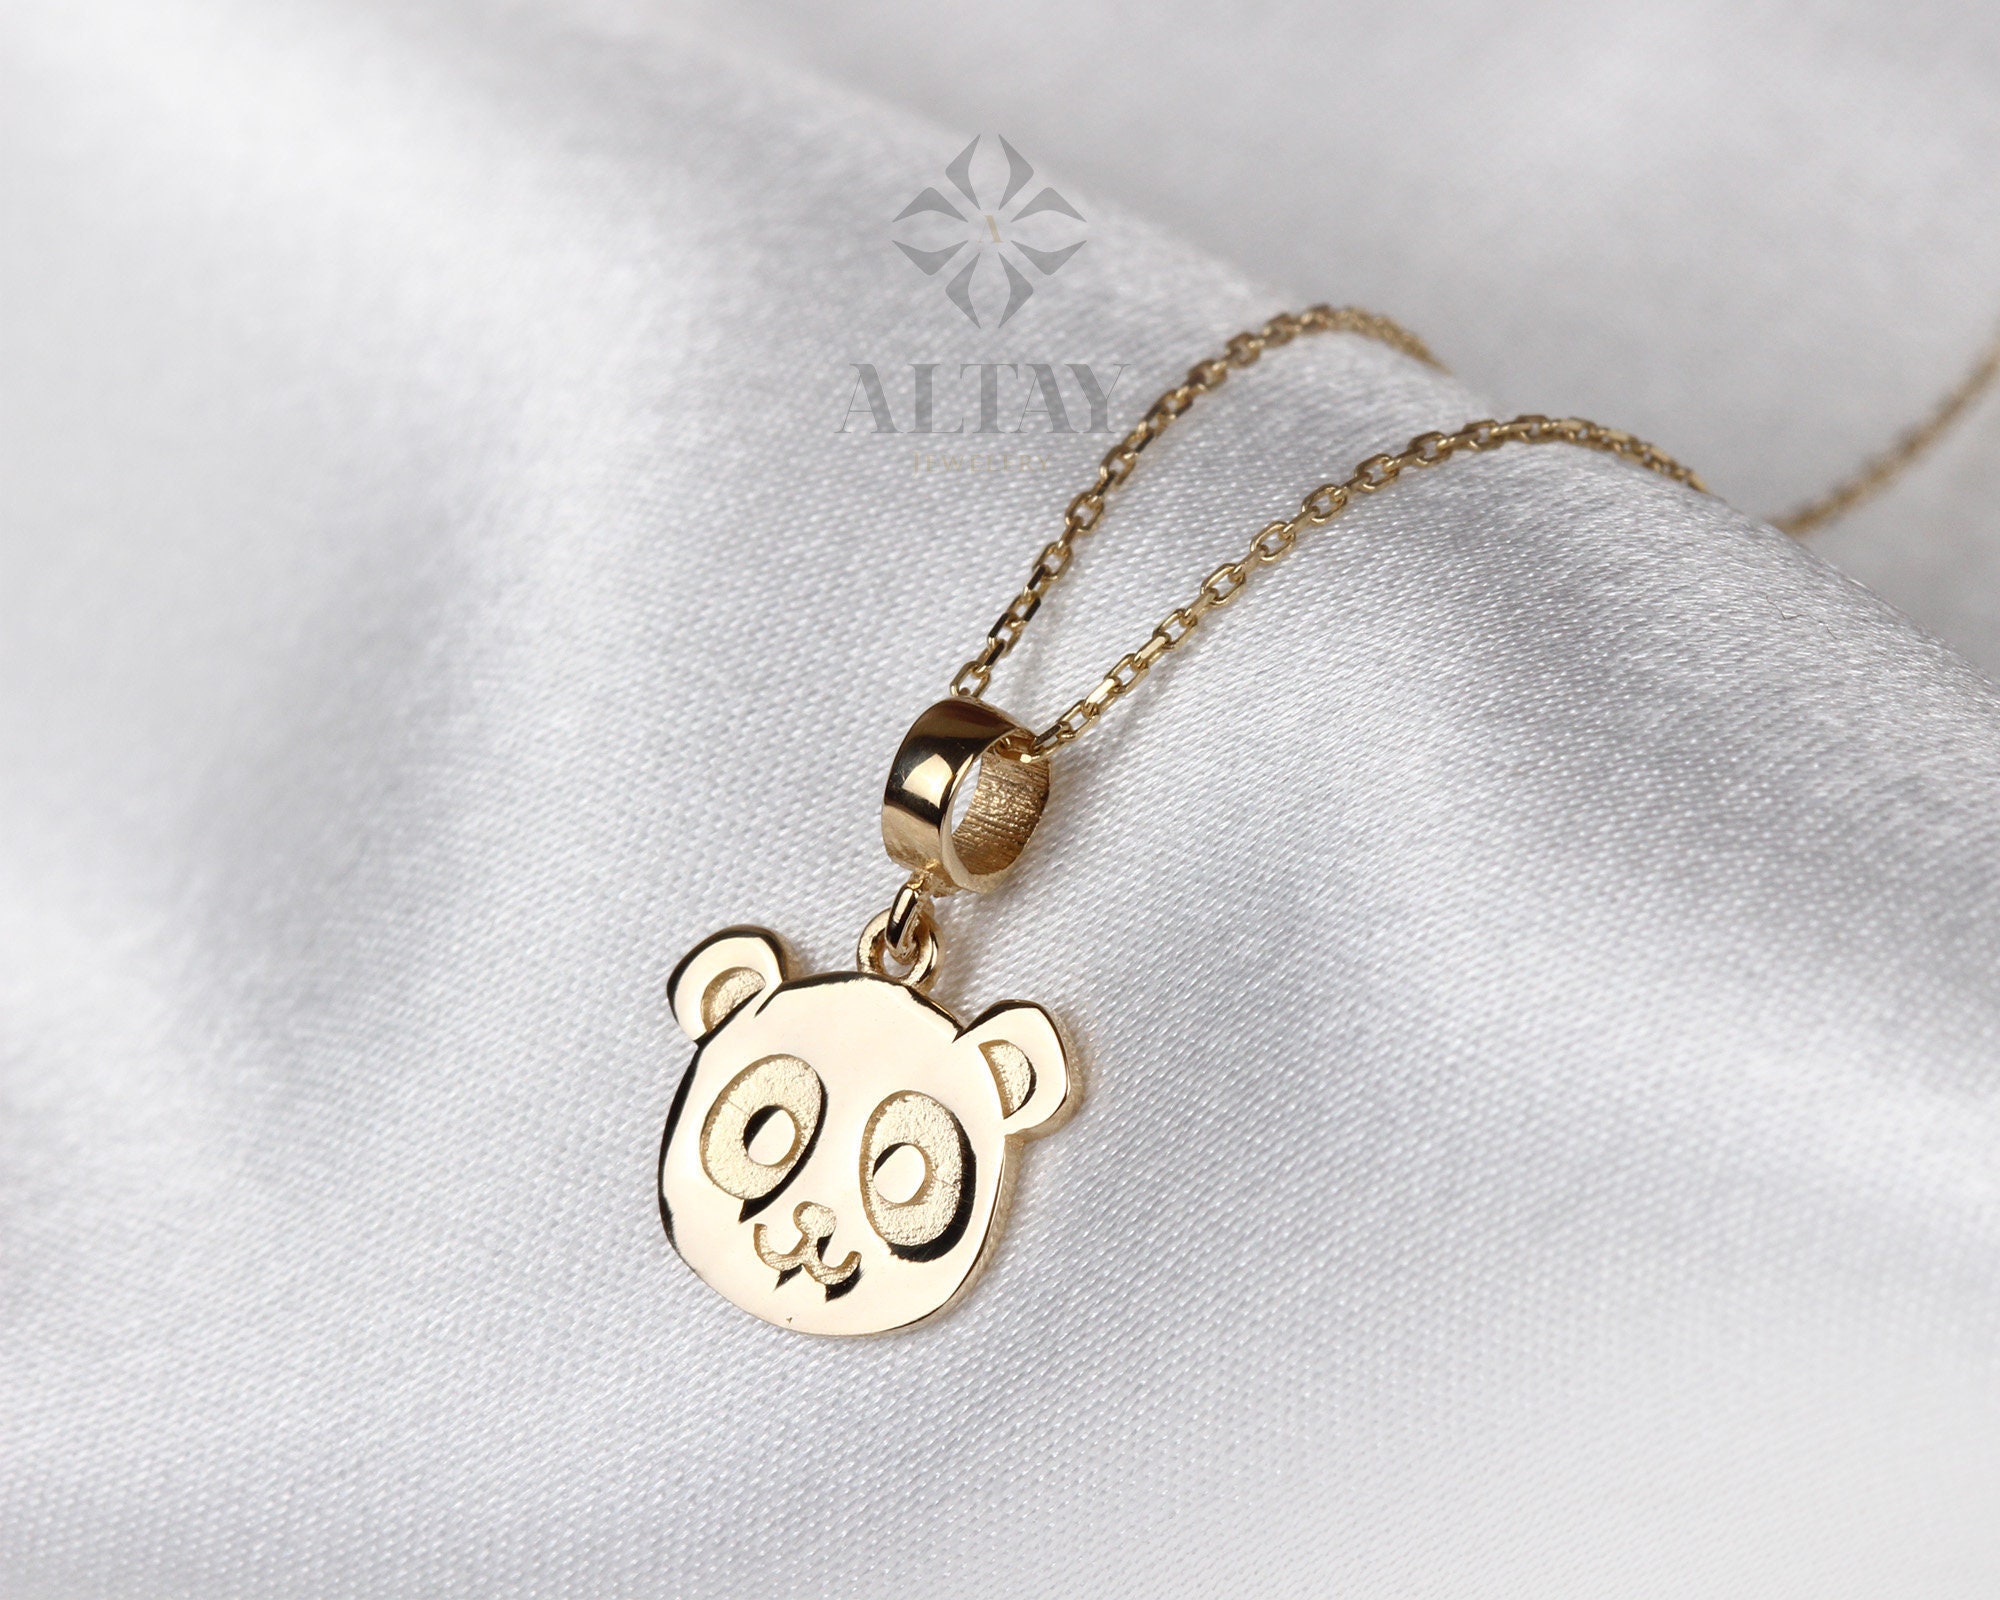 Buy Baby Panda Necklace Panda Bear Animal Jewelry Asian Wildlife Art Pendant  in Bronze or Silver With Chain Included Online in India - Etsy